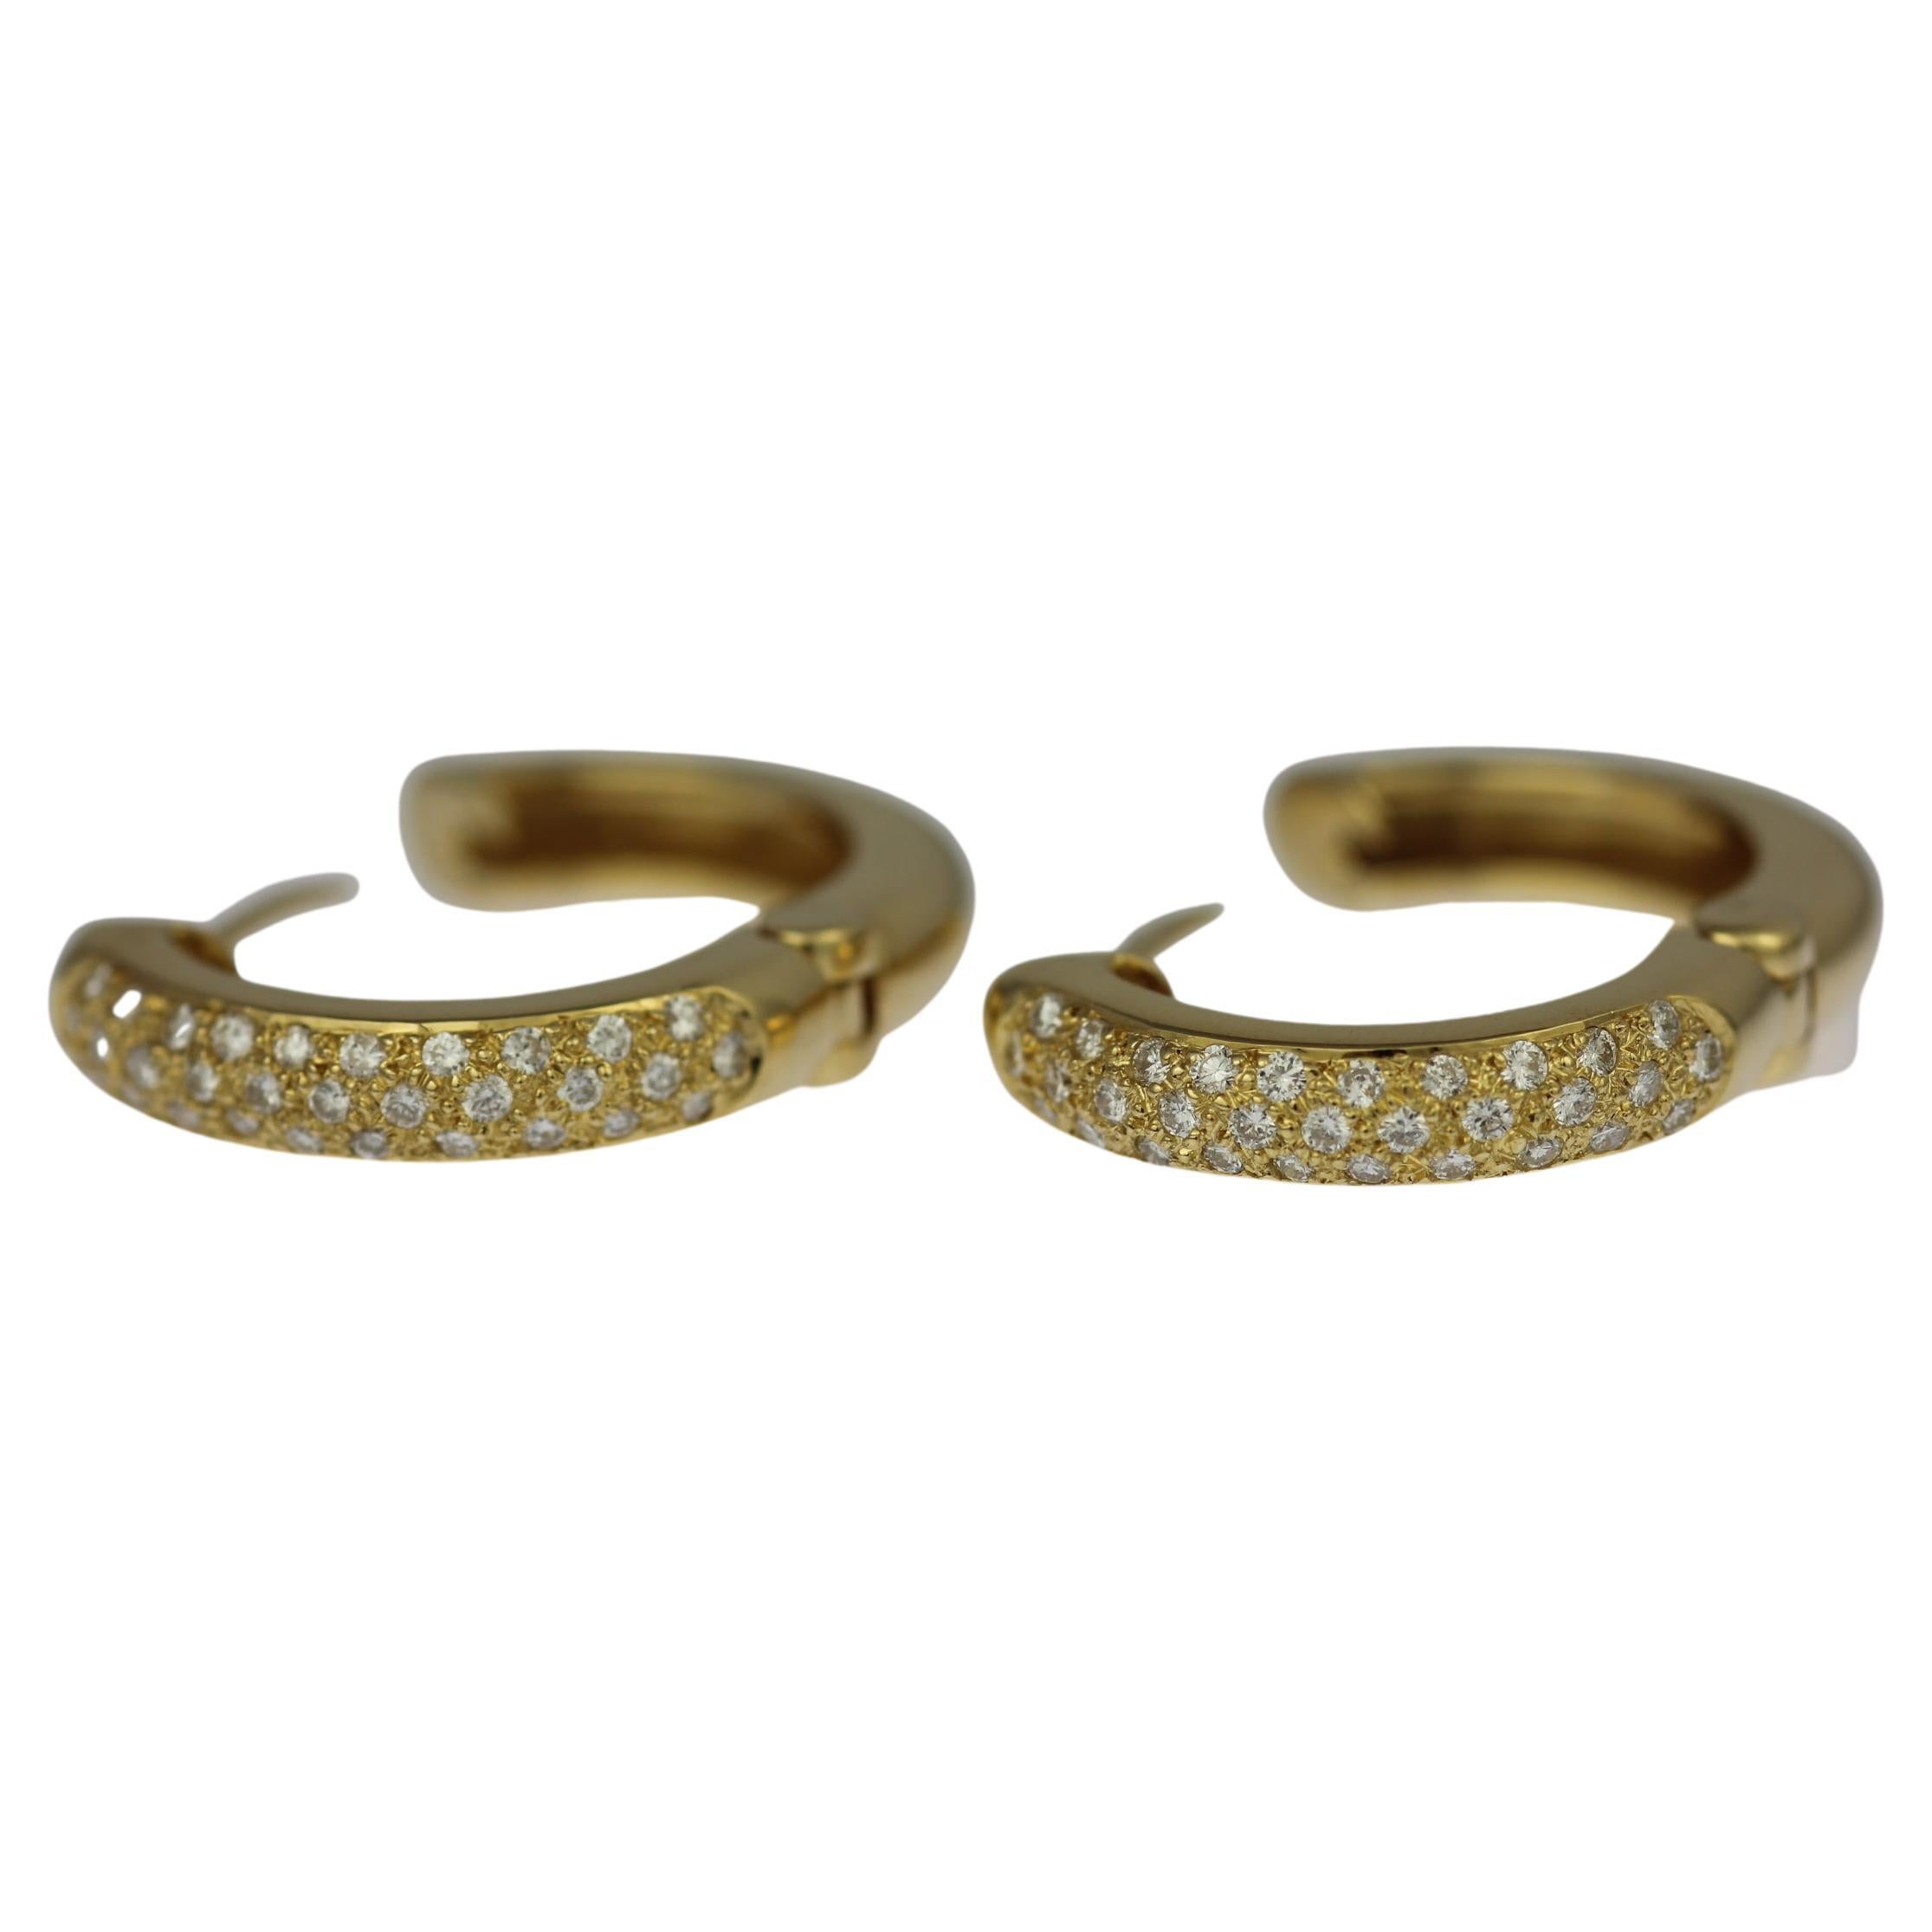 Polished 18ct yellow gold hinged hoop earrings with huggy style closure.

Featuring pave diamond fronts set with a total of 64 round brilliant diamonds weighing 0.32ct.

The rear side of the hoops are smooth polished gold.

Hoop height: 26mm
Hoop